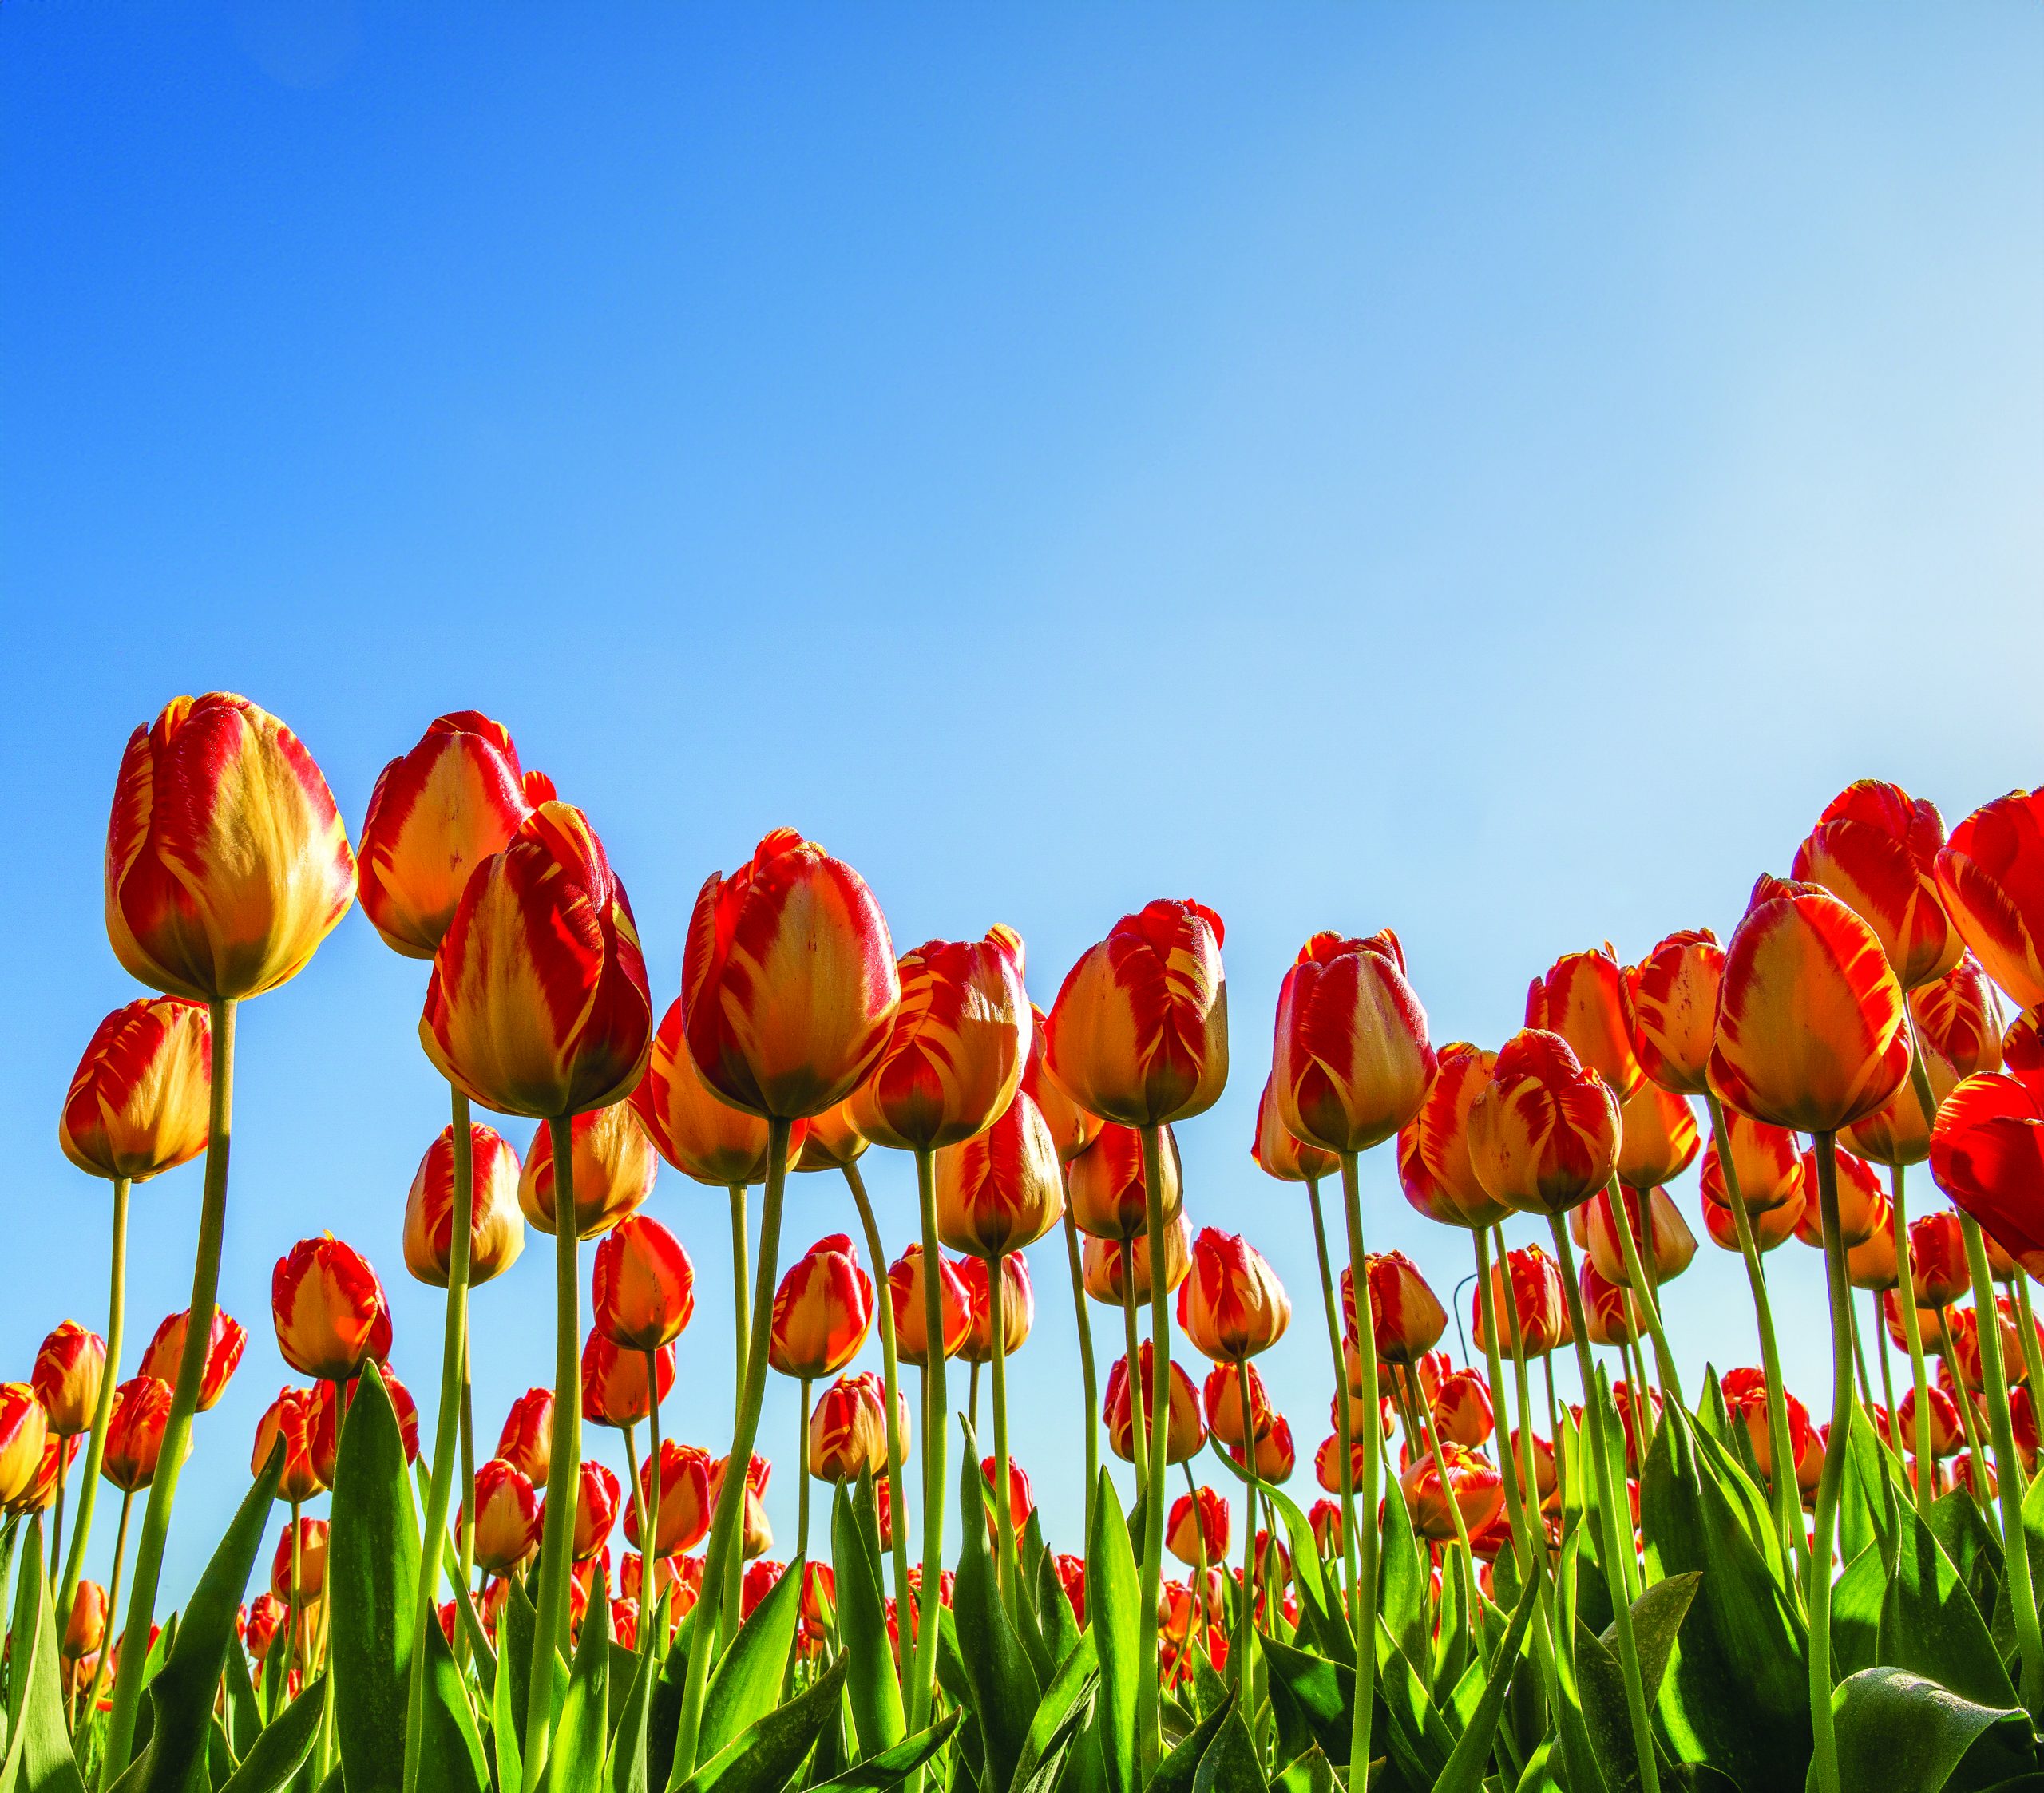 A low angle shot of red and yellow flower field with a blue sky in the background